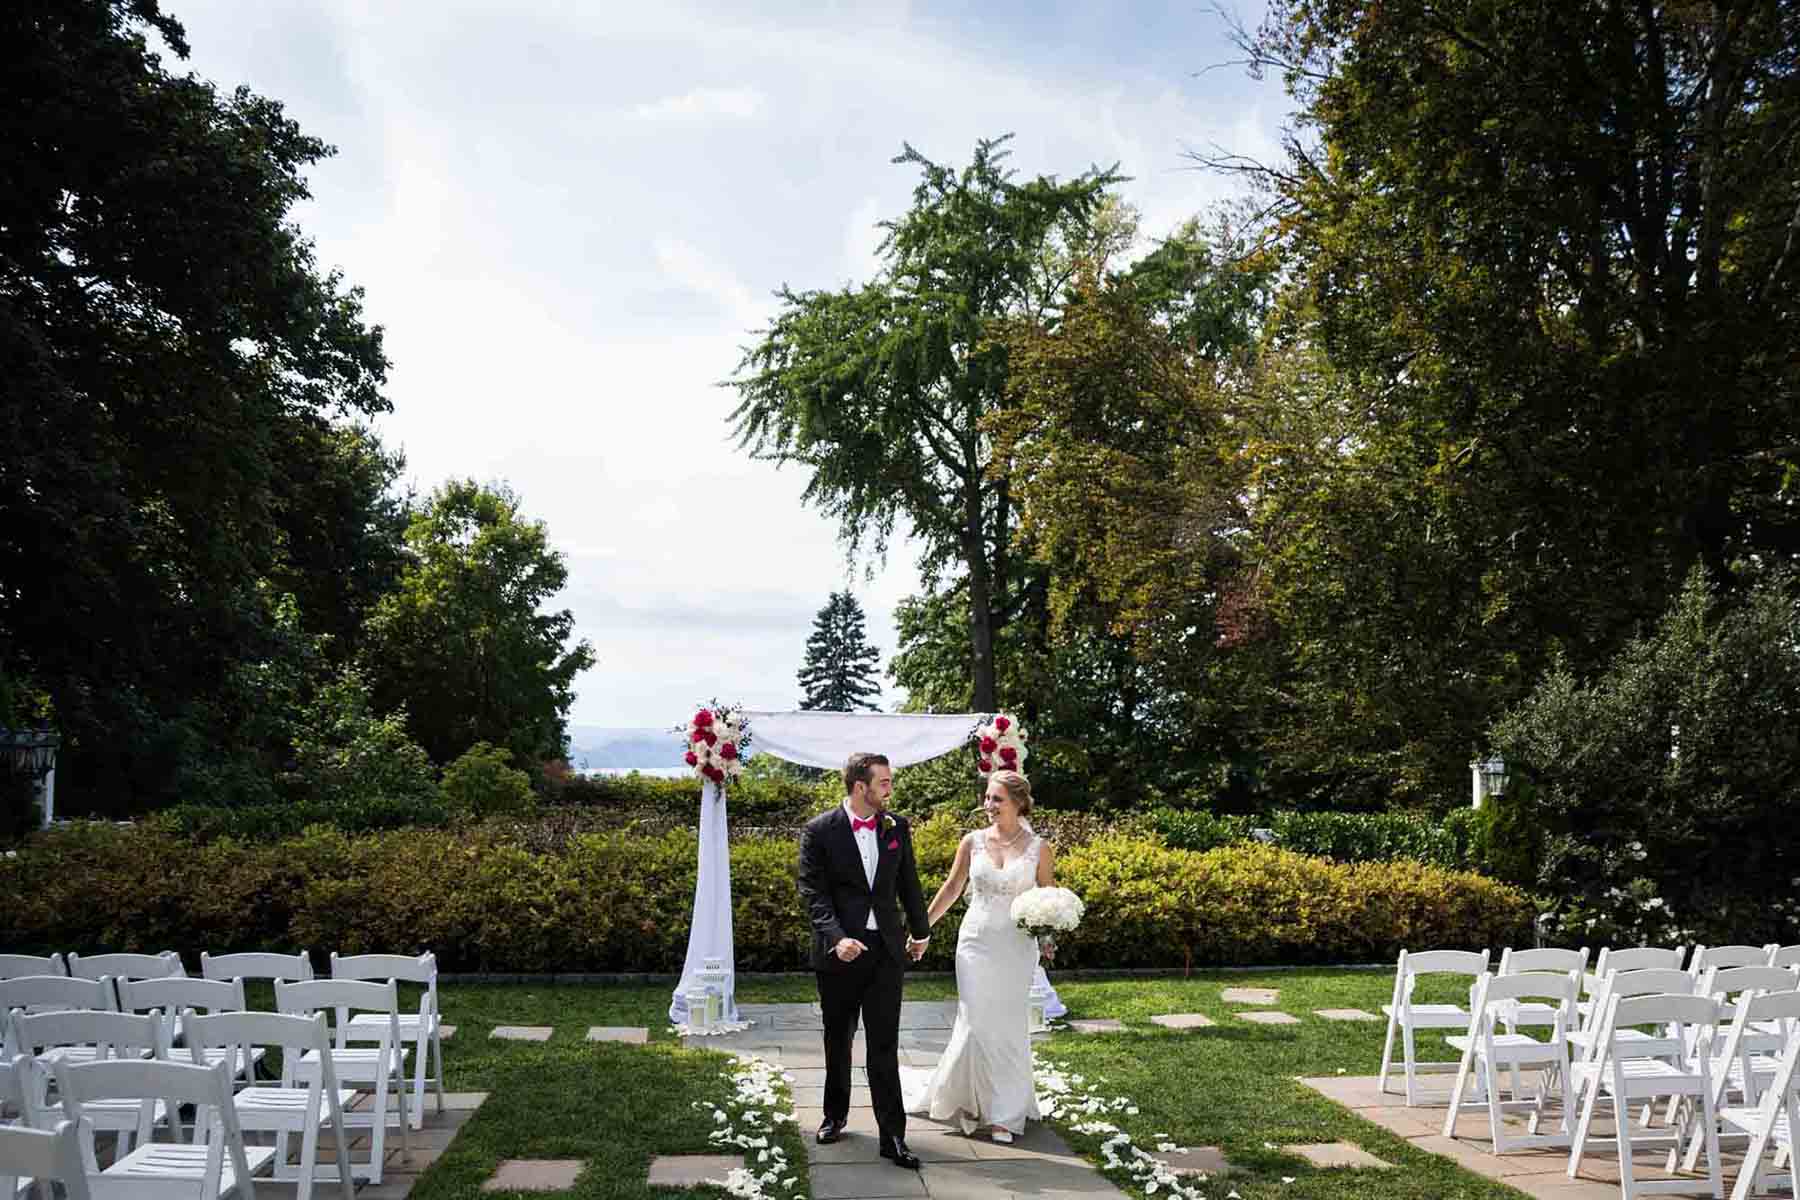 Bride and groom walking up aisle between white chairs at a Briarcliff Manor wedding